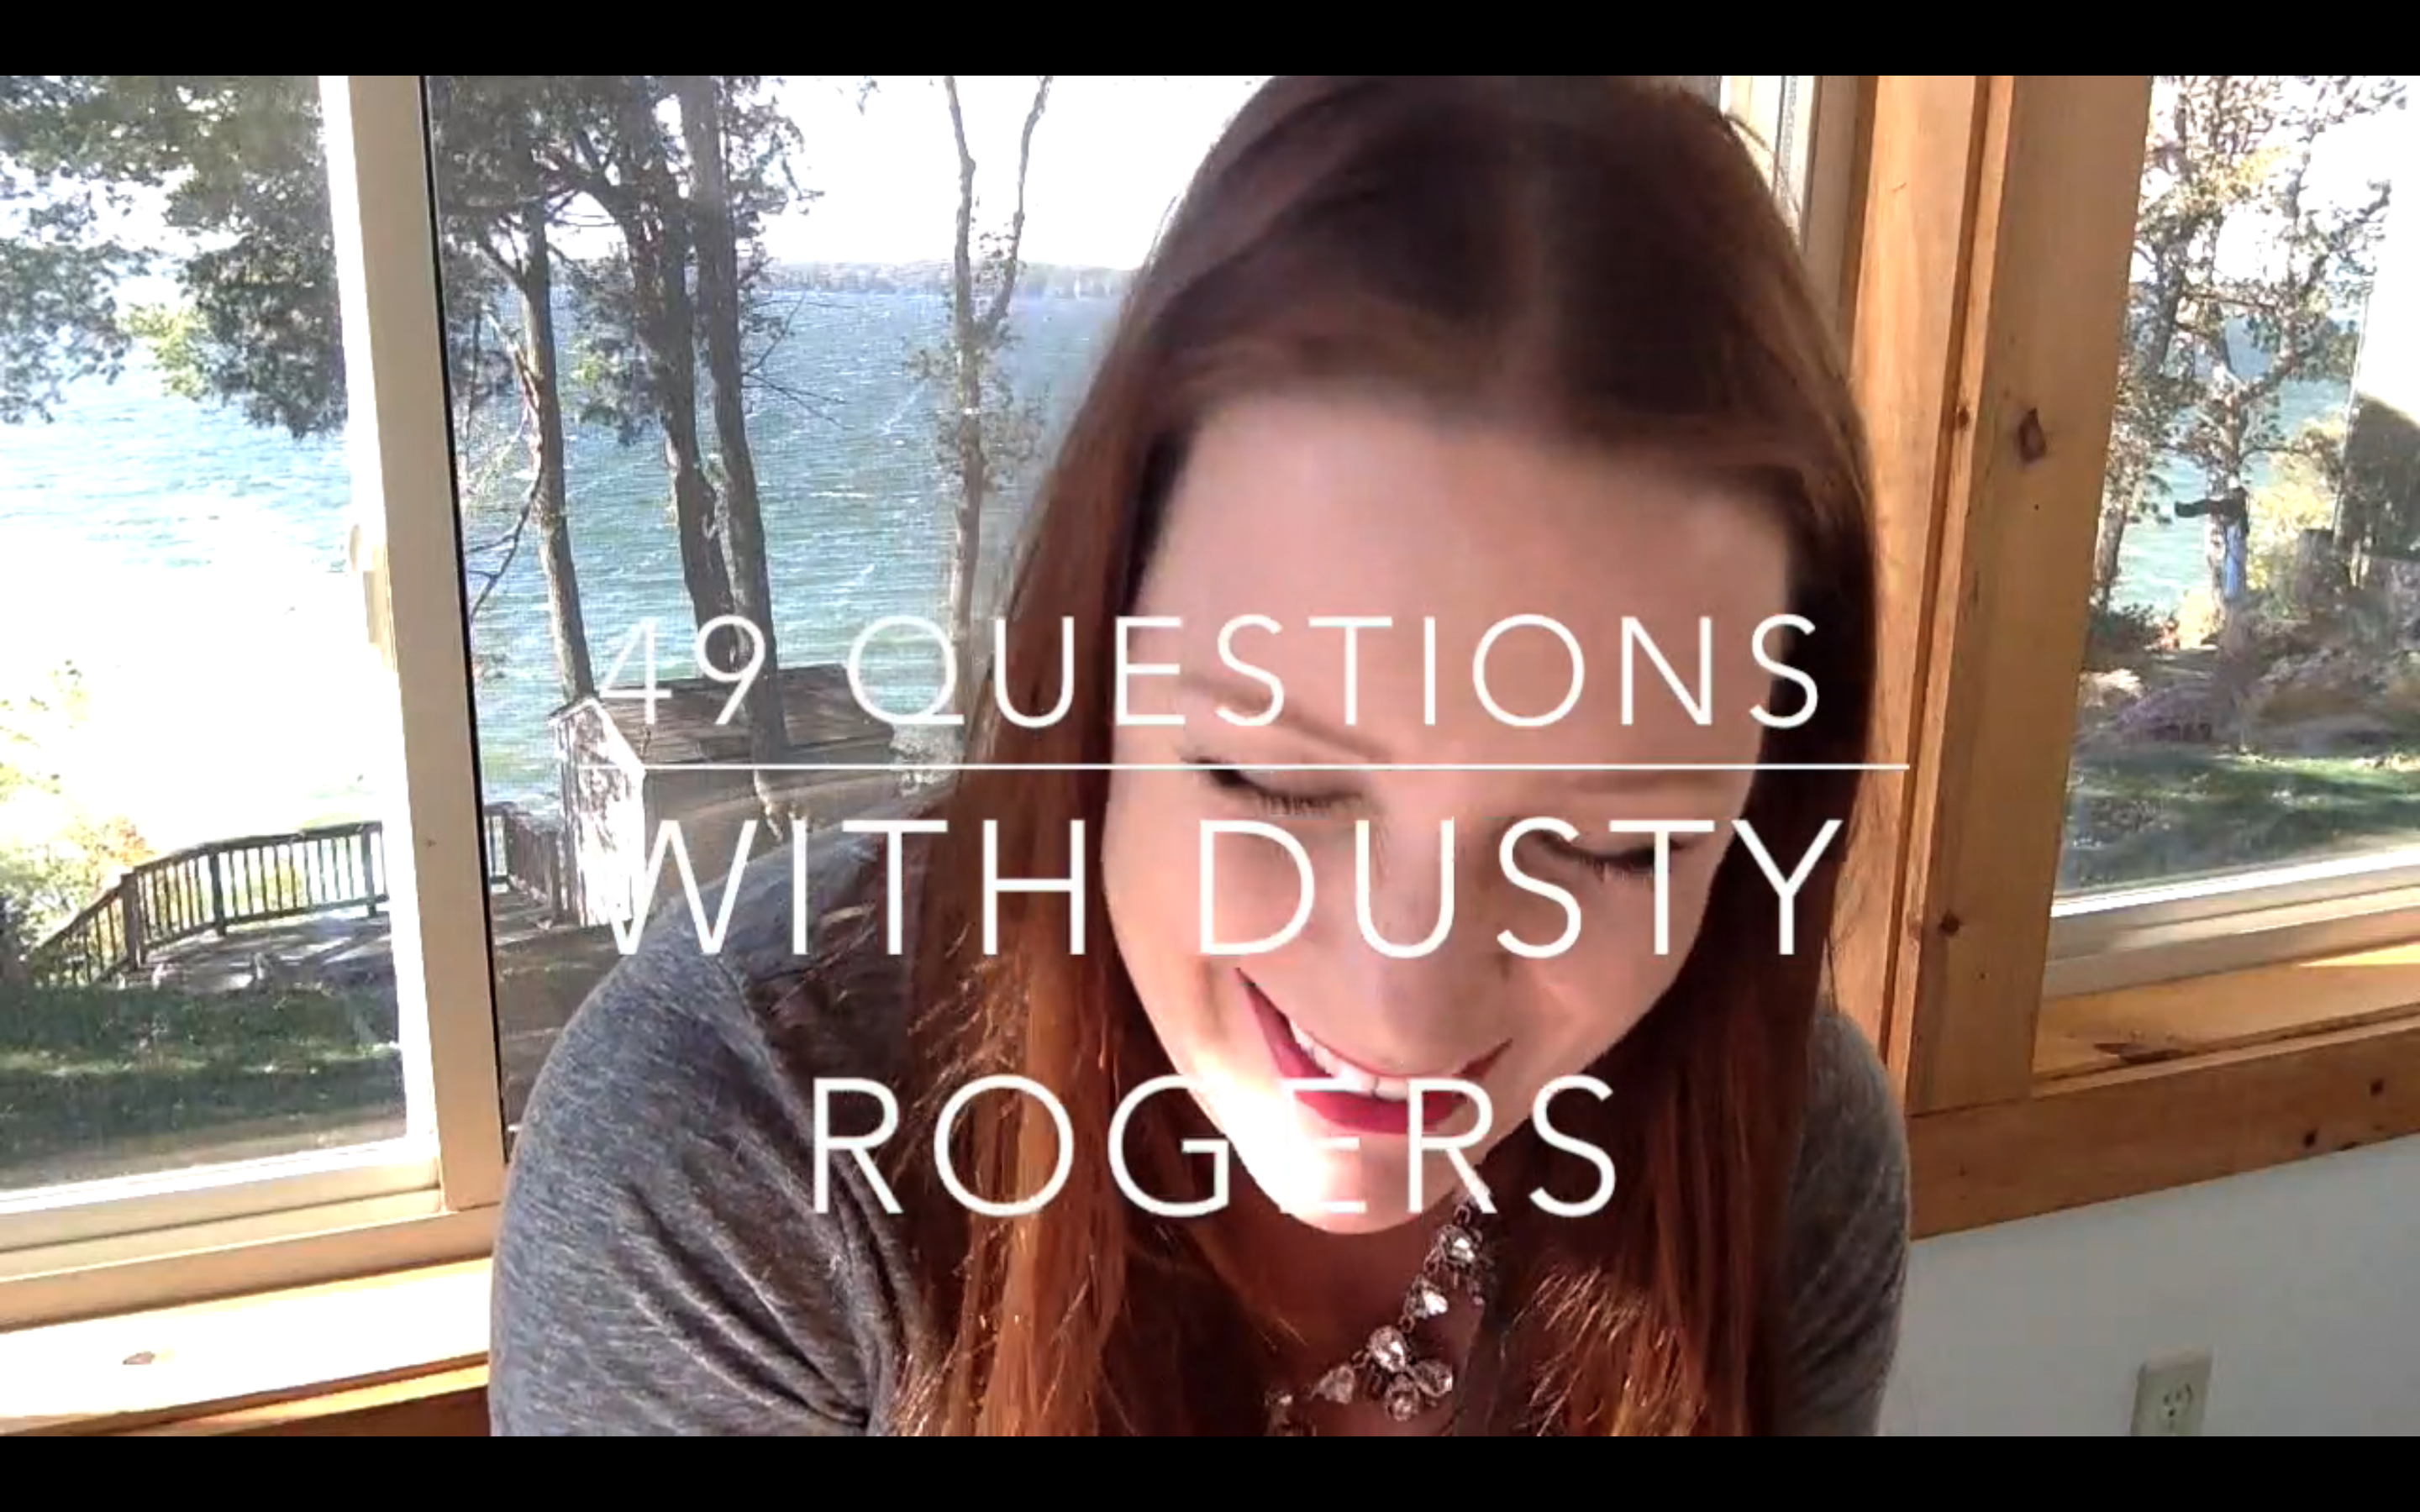 49 Questions with Dusty Rogers of All Things G&D, including life as a DIY blogger, her favorite things, and the hysterical "horrible selfie game." 